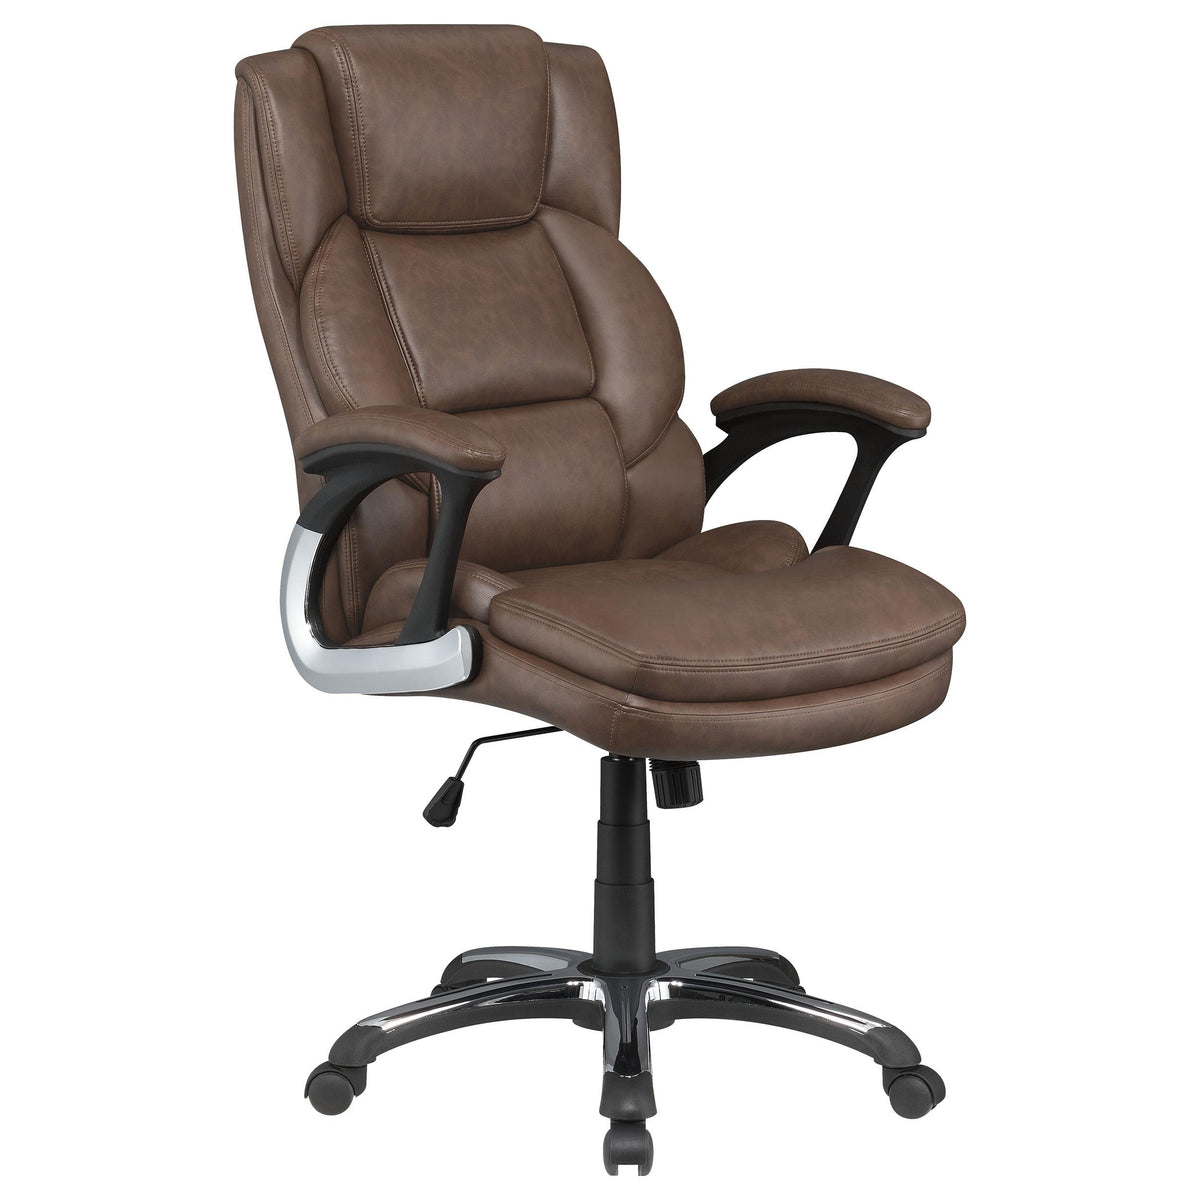 Nerris Adjustable Height Office Chair with Padded Arm Brown and Black  Las Vegas Furniture Stores